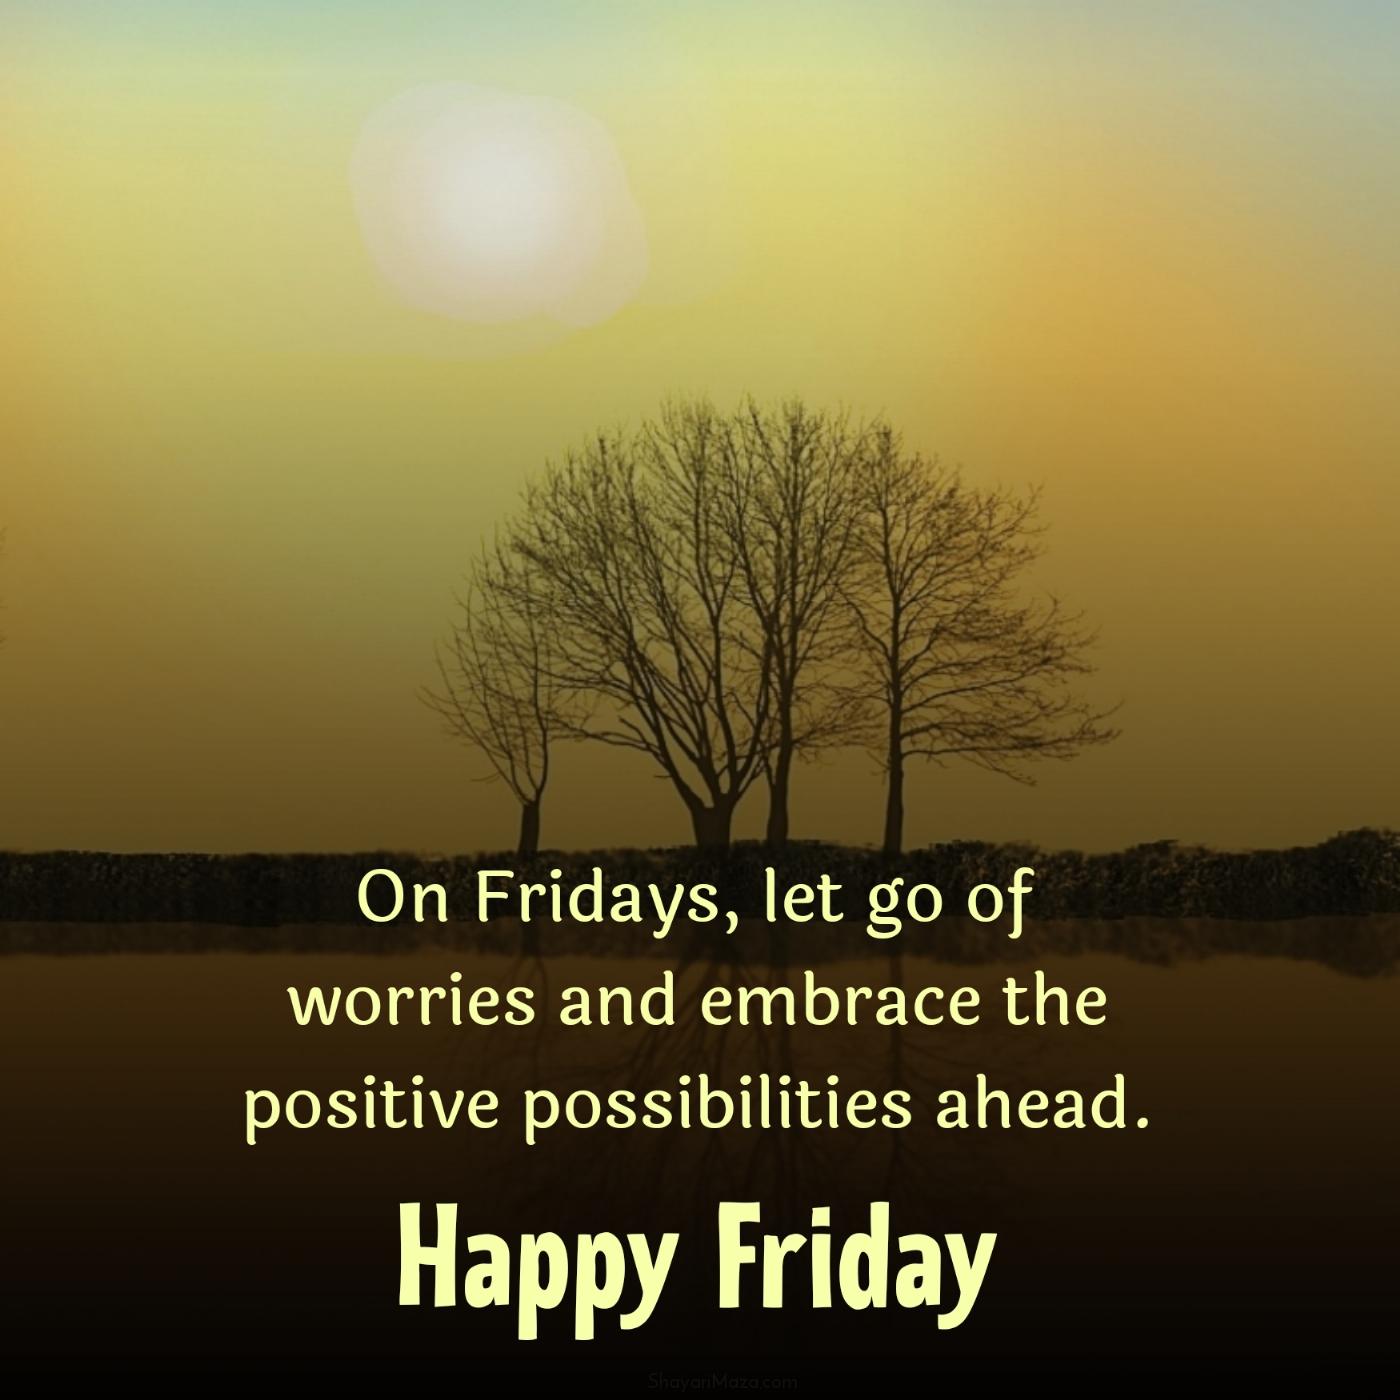 On Fridays let go of worries and embrace the positive possibilities